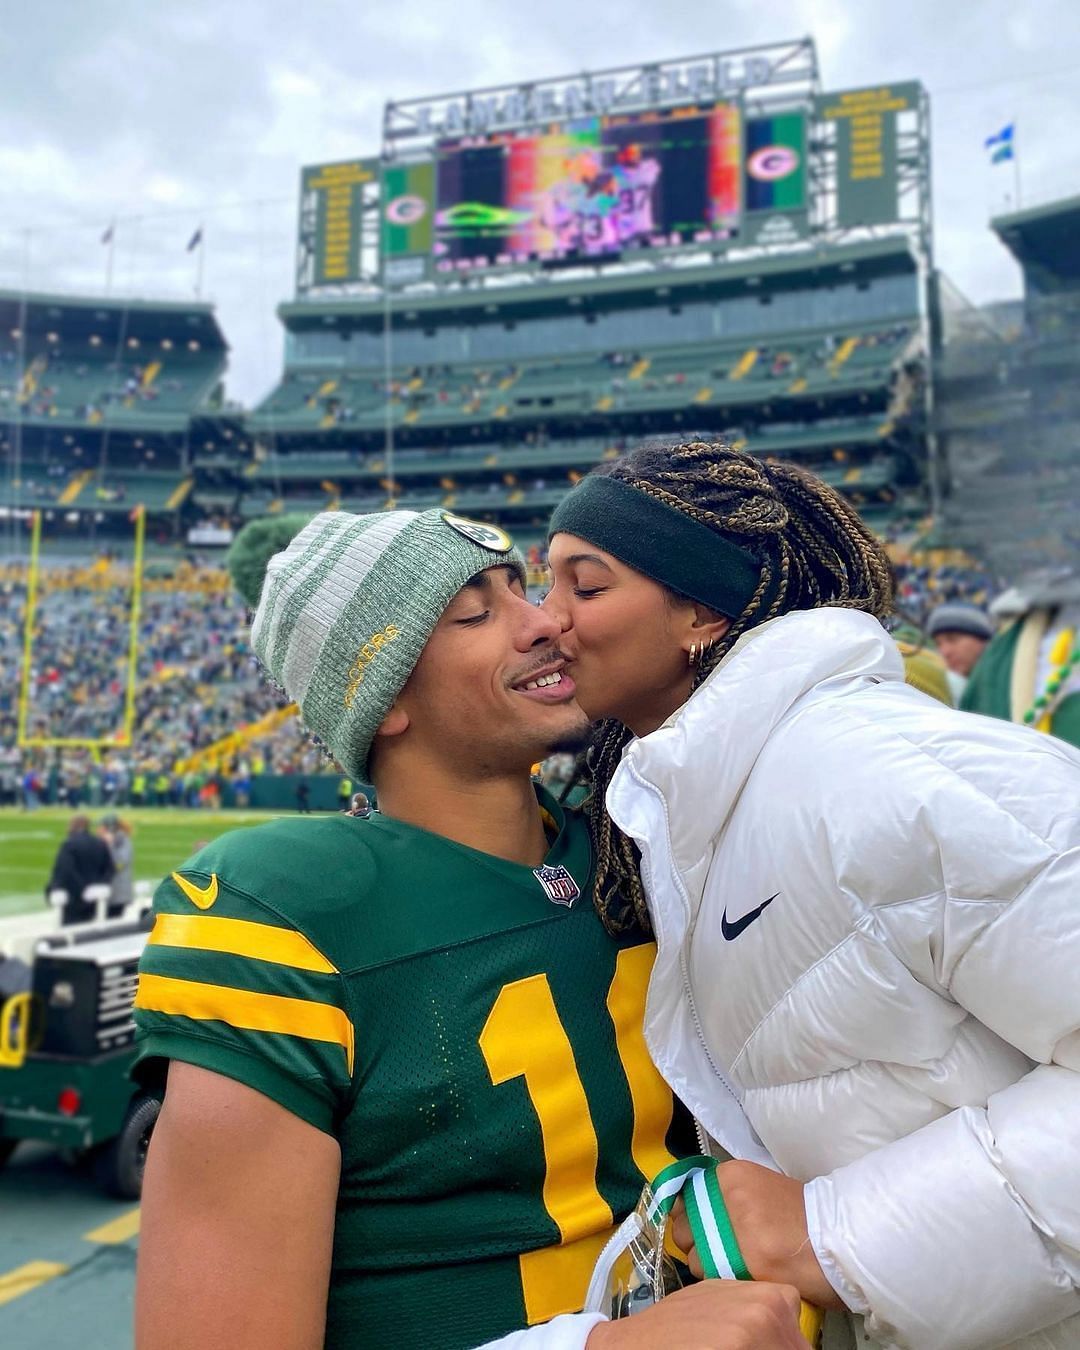 Ronika Stone with Jordan Love at a Packers game in October 2022. Credit: Ronika Stone (IG)